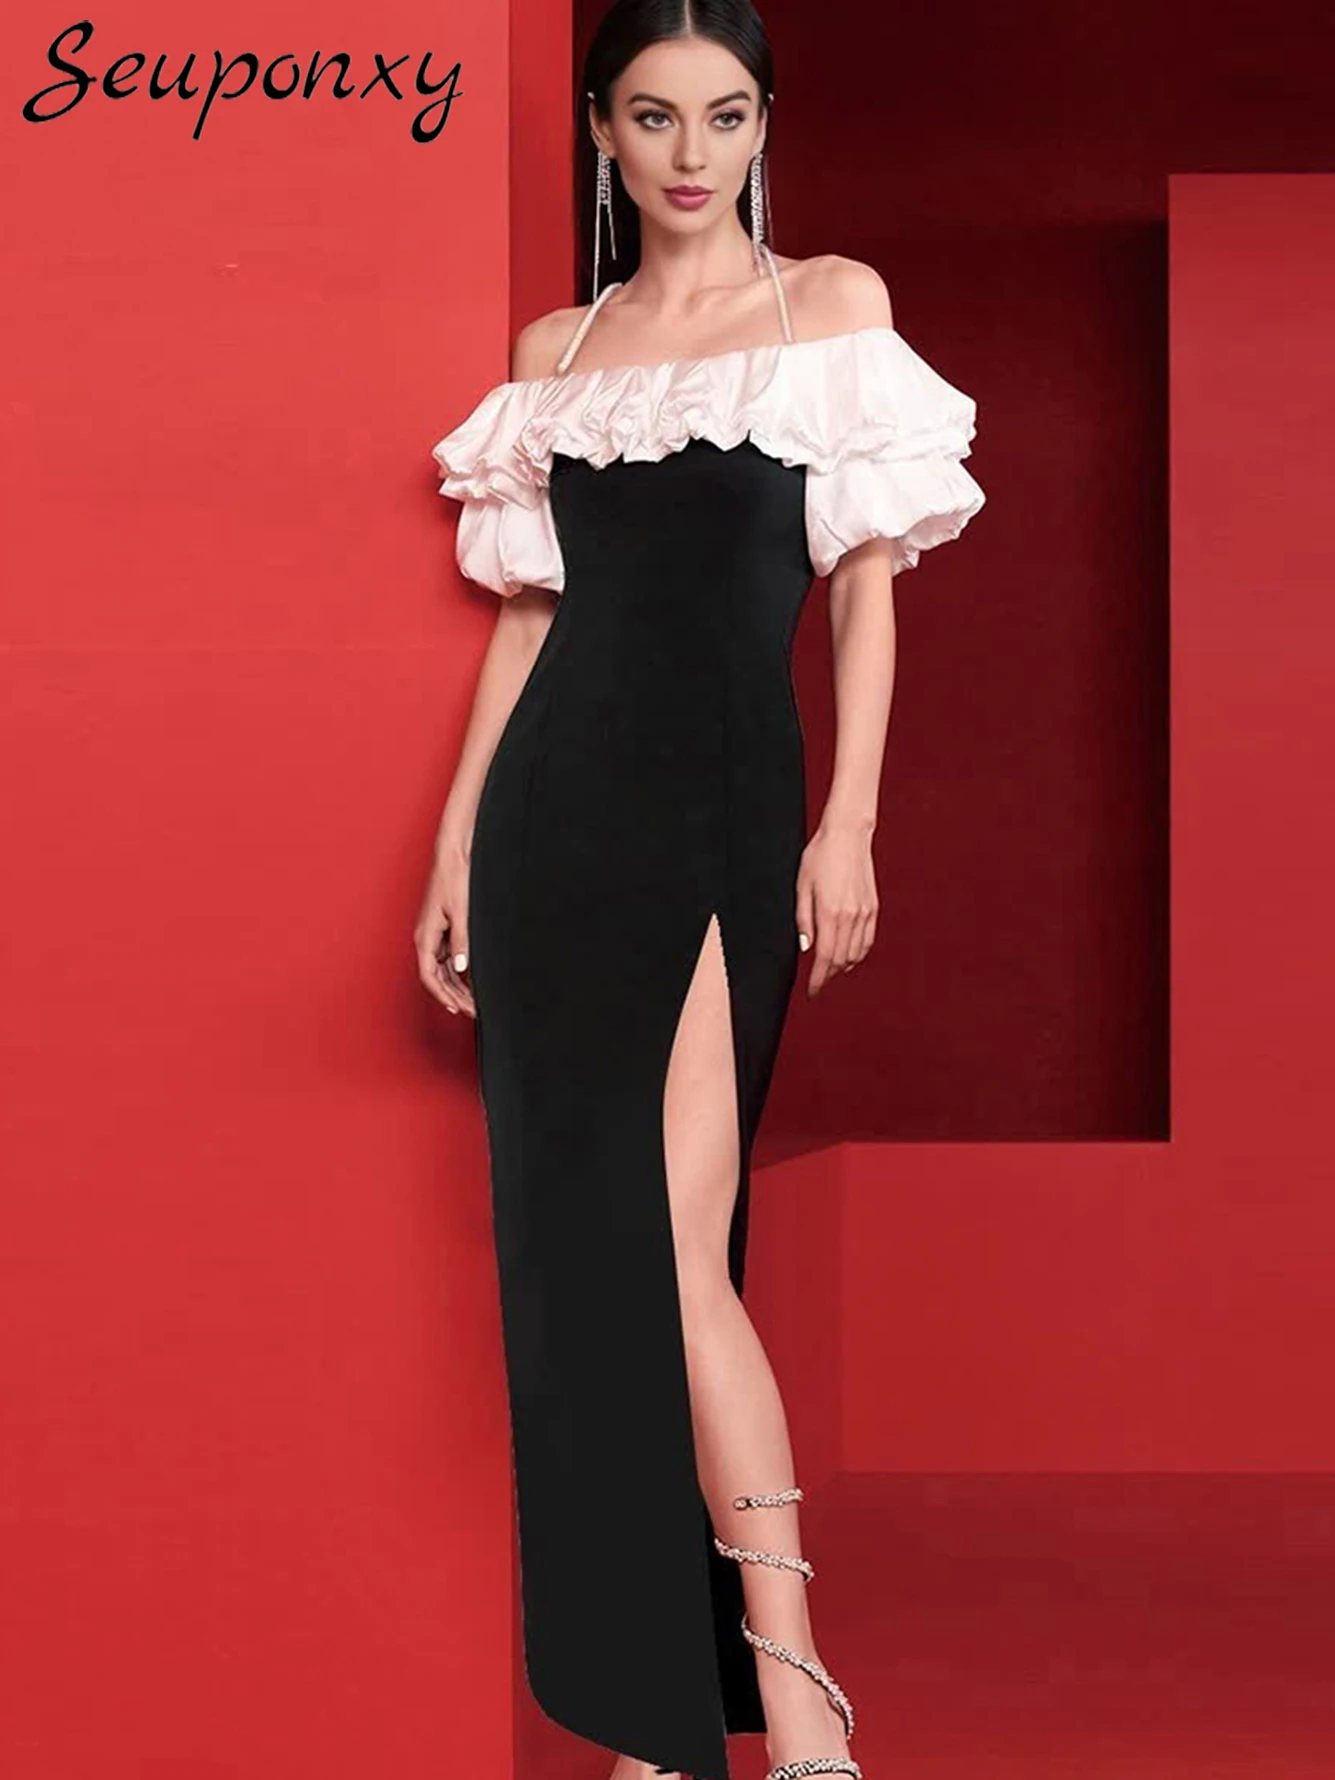 

High Quality Women'S Sexy Off The Shoulder Puff Sleeves Ruffled Edges Black High Slit Maxi Dress Celebrity Party Dress Vestidos